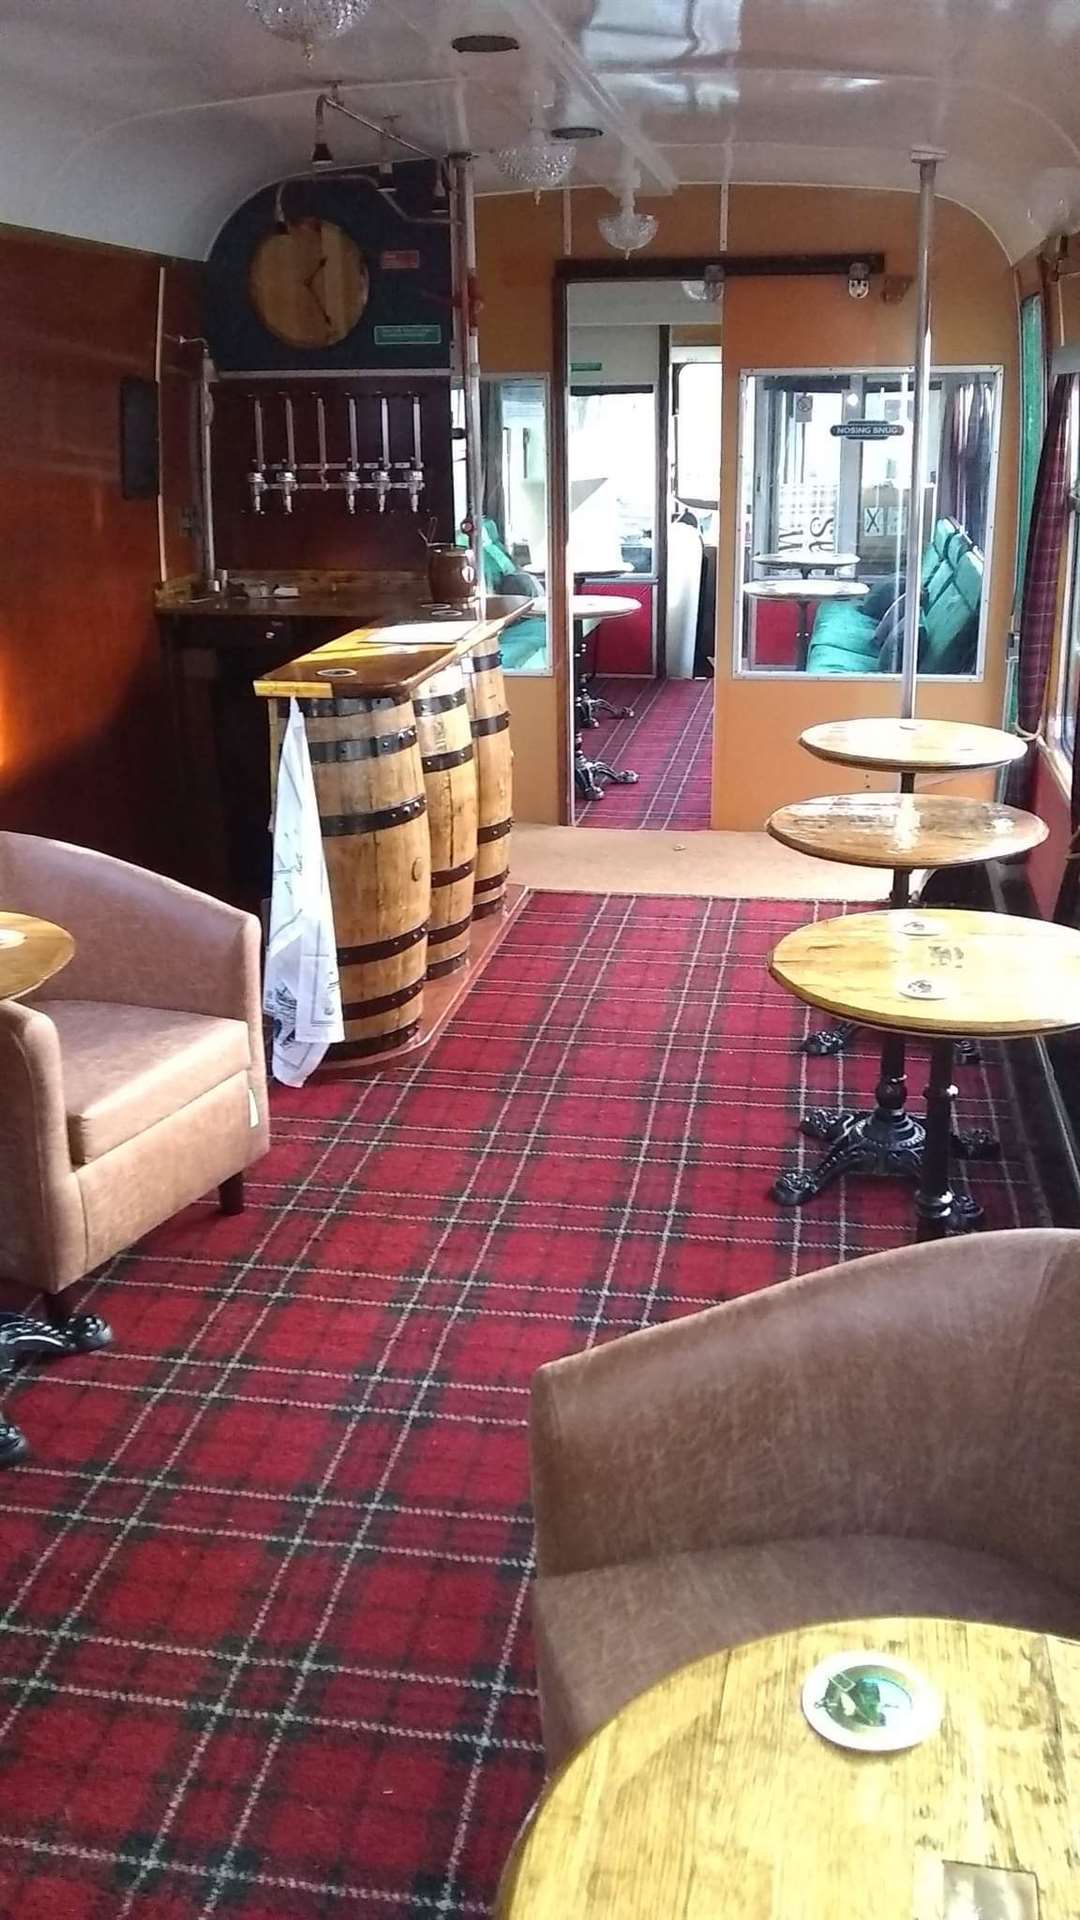 The inside of the newly refurbished Dram Tram. The train will be available for public functions next year.